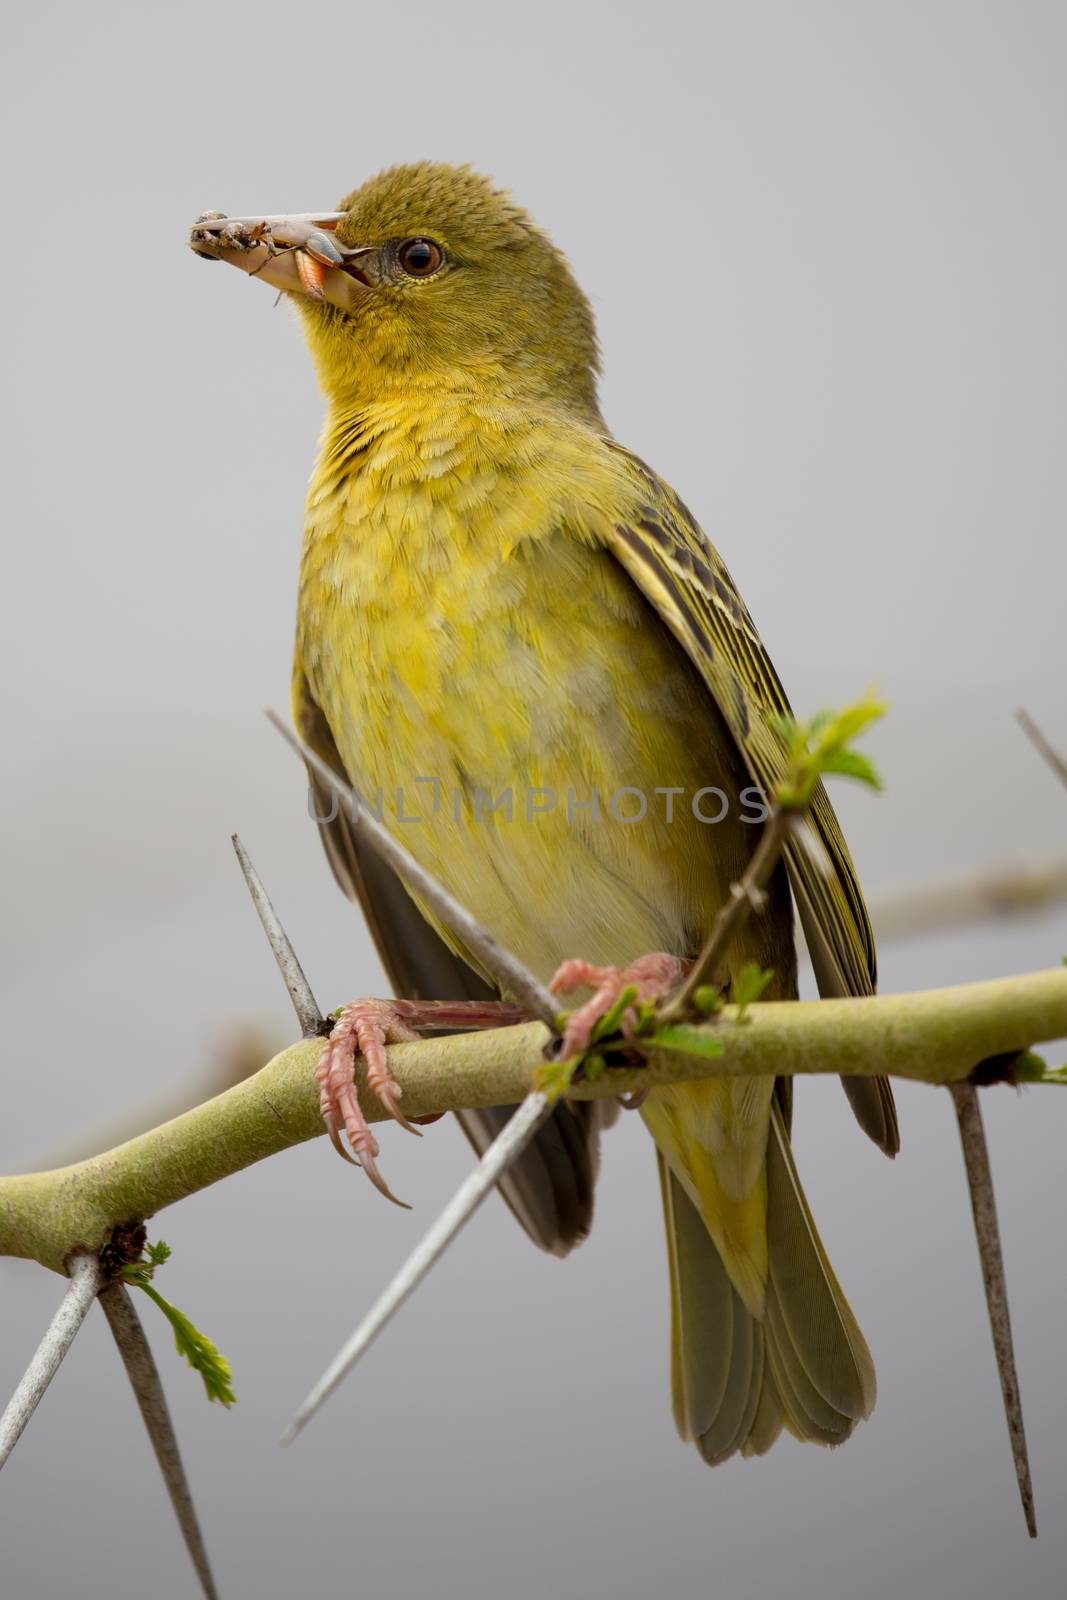 Pretty Cape Weaver Bird with insects that it has caught in it's beak